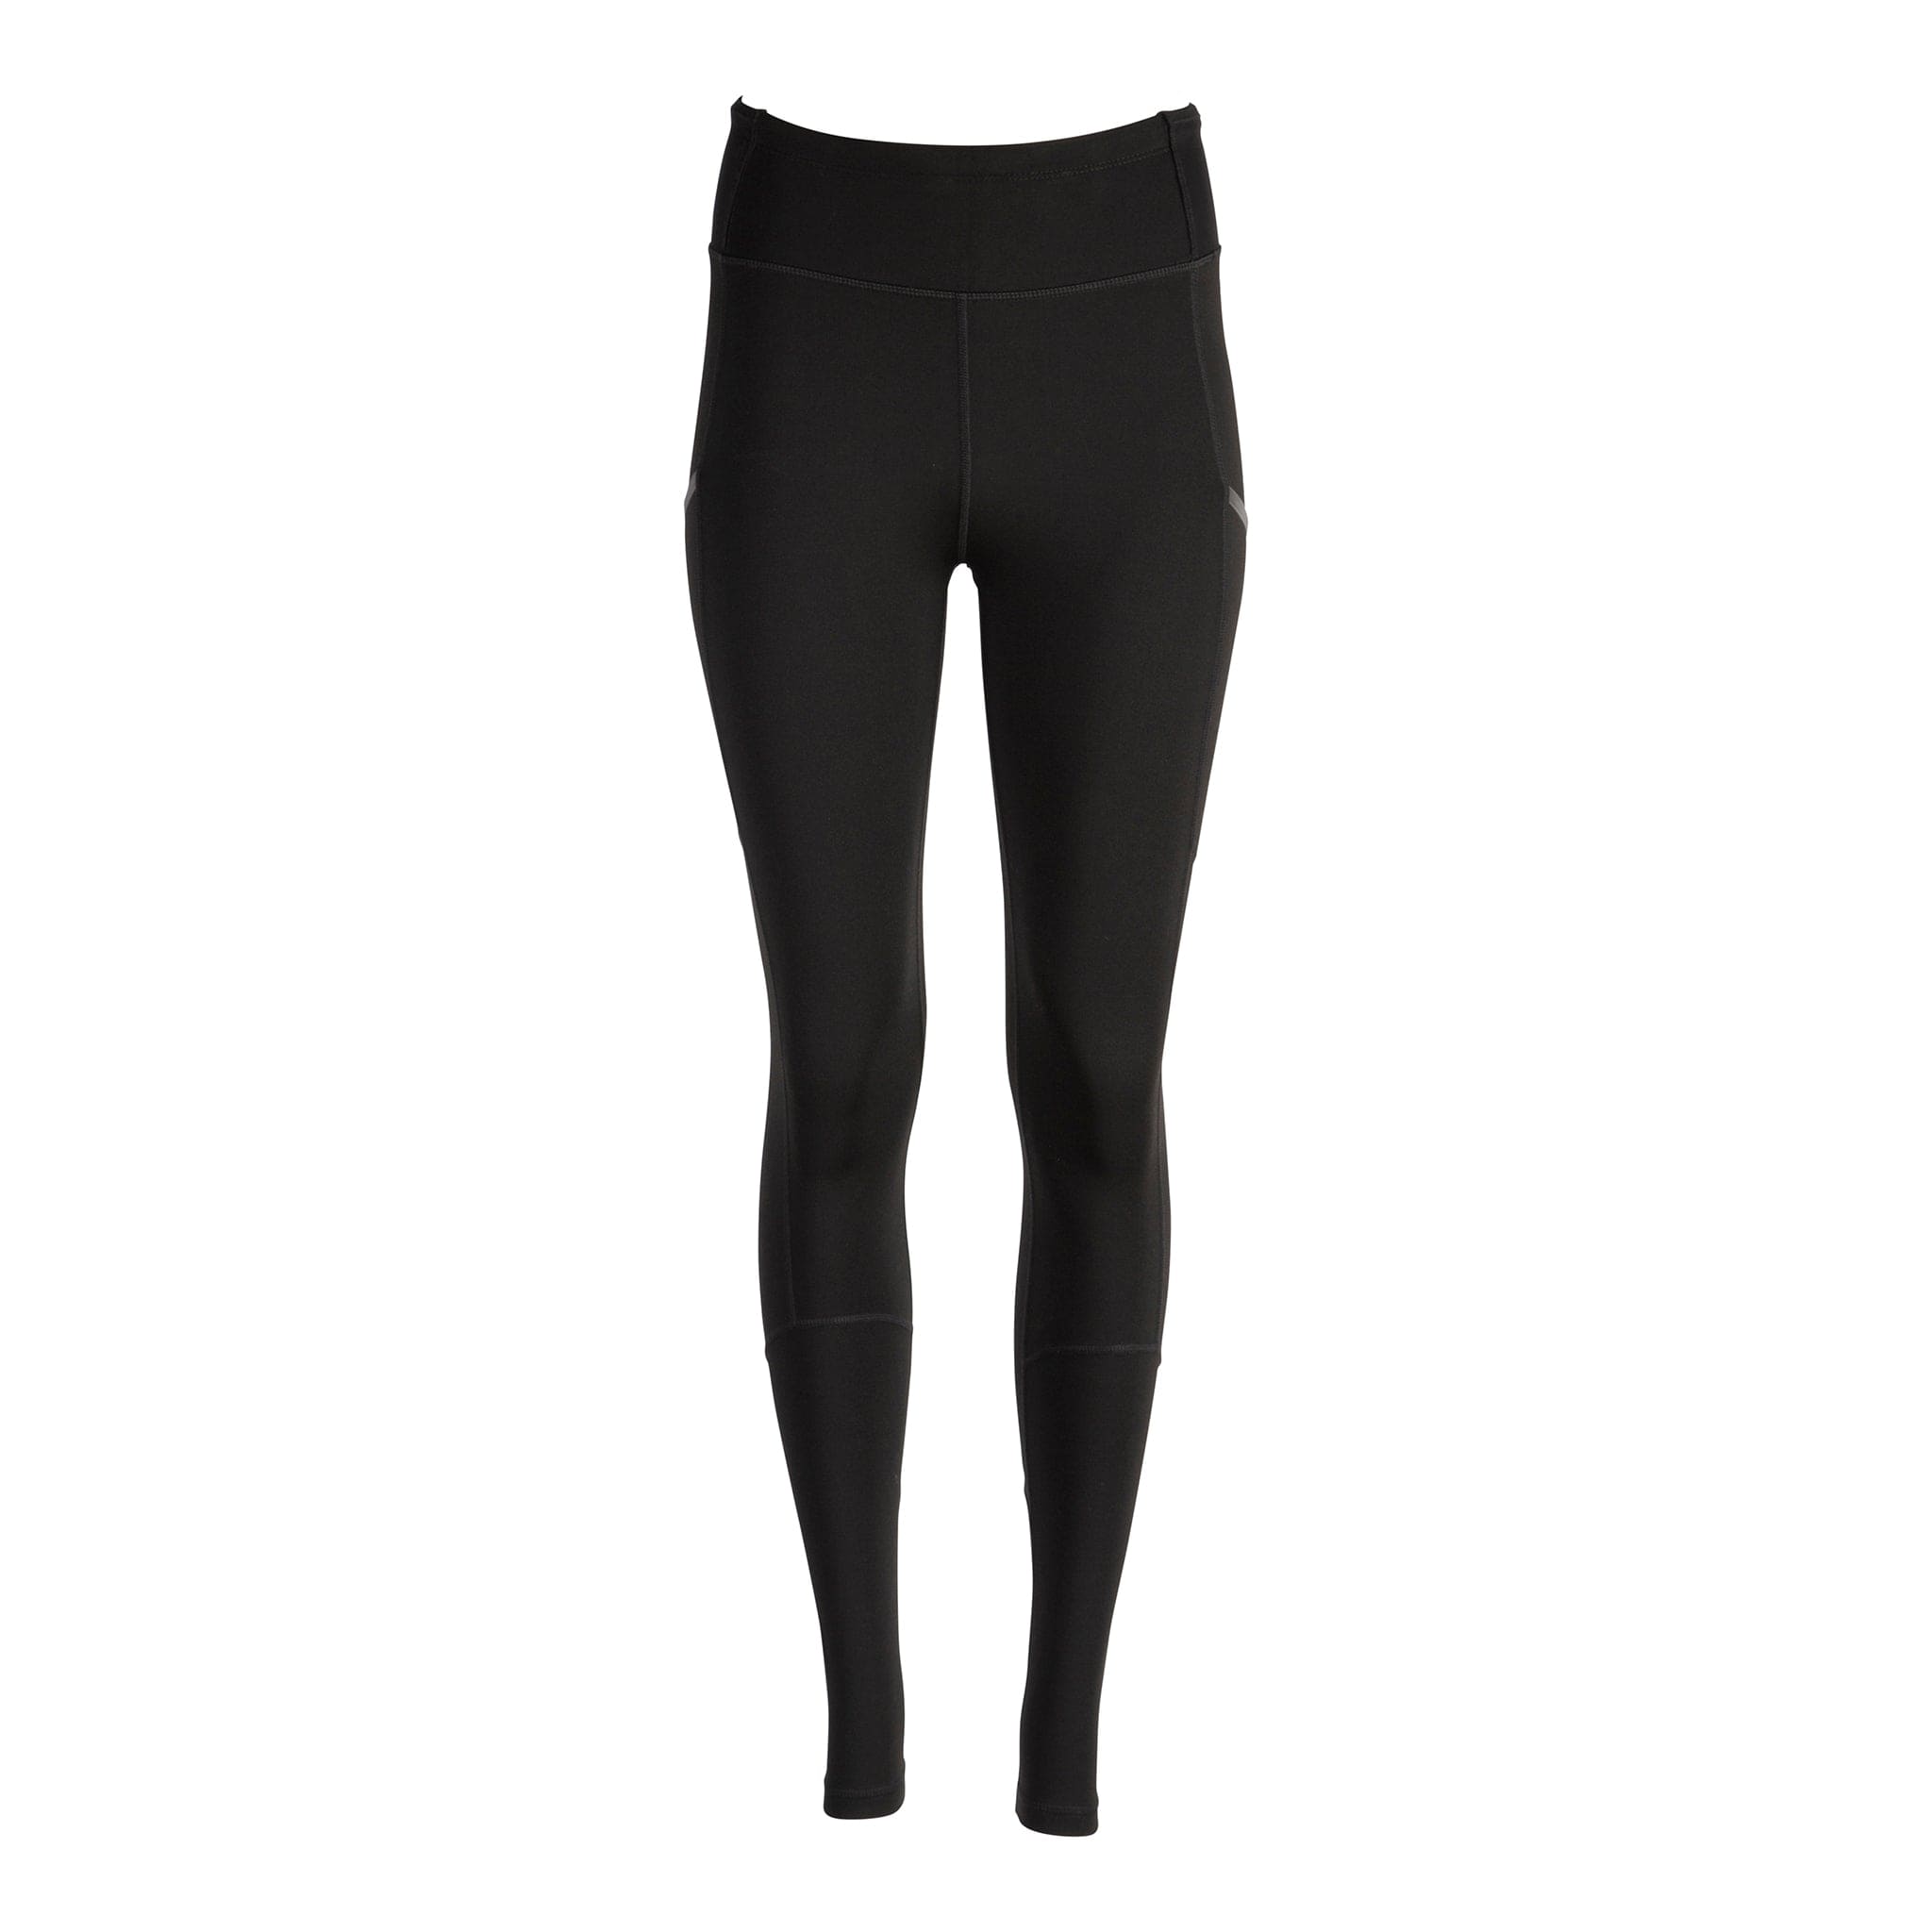 Under Armour Solid Black Leggings Size XL - 53% off